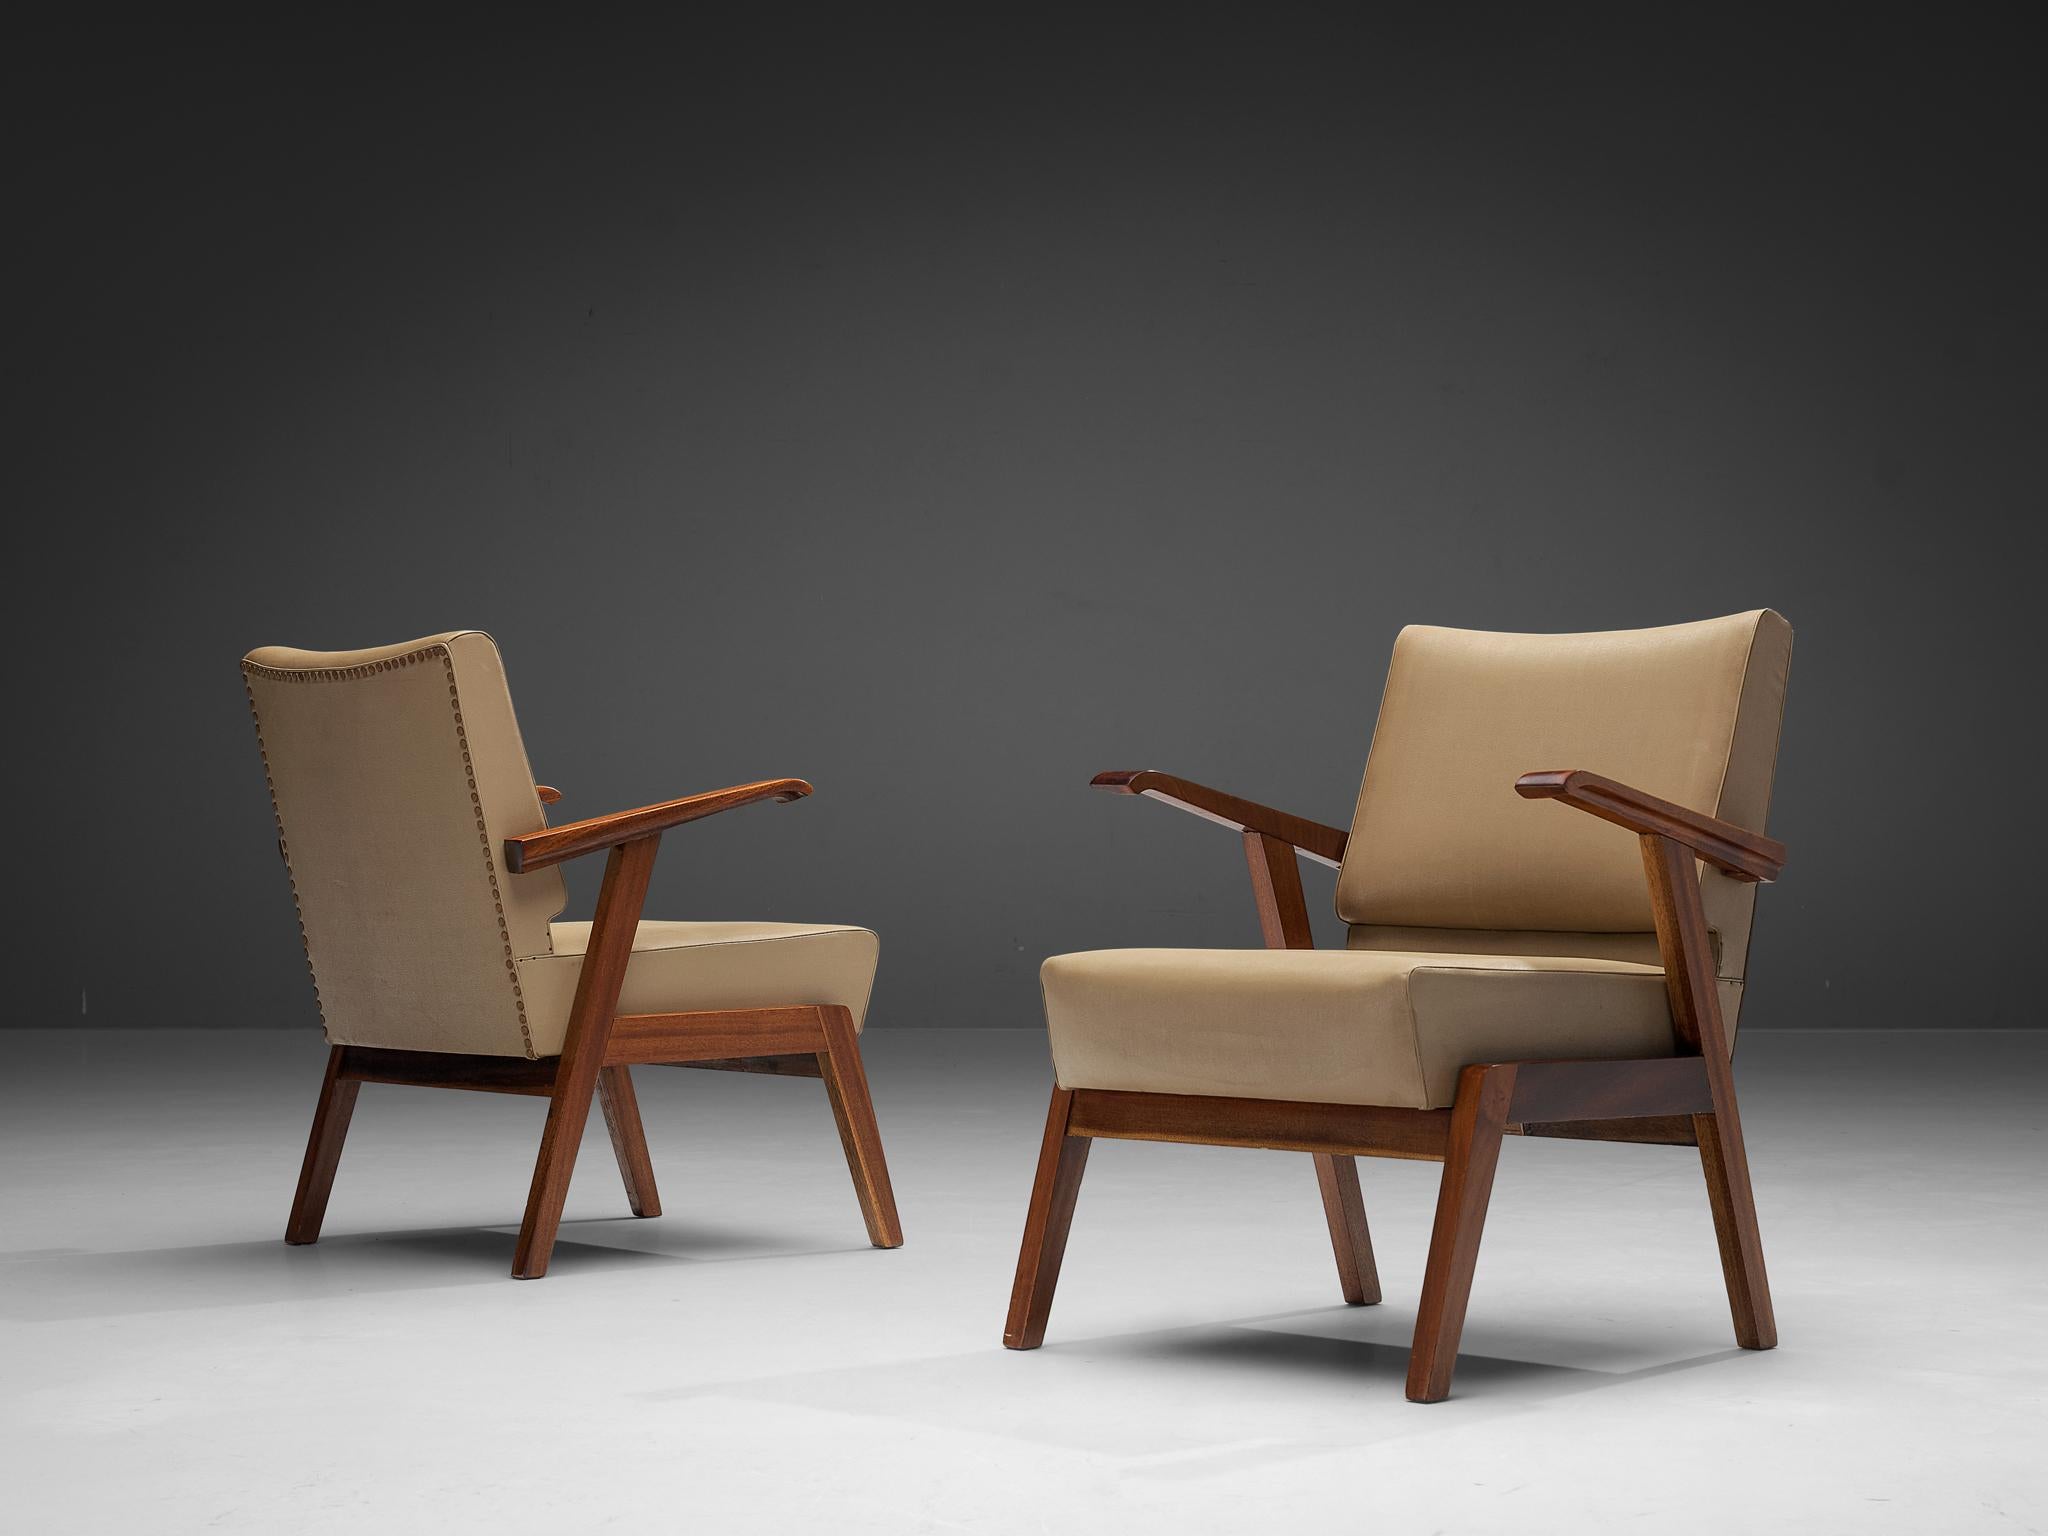 Pair of armchairs, faux leather, walnut, metal. Italy, 1960s

These delicate lounge chairs from Italy are characterized by an angular open framework executed in walnut. The beige upholstery in combination with the deep warm tone of the wood provides